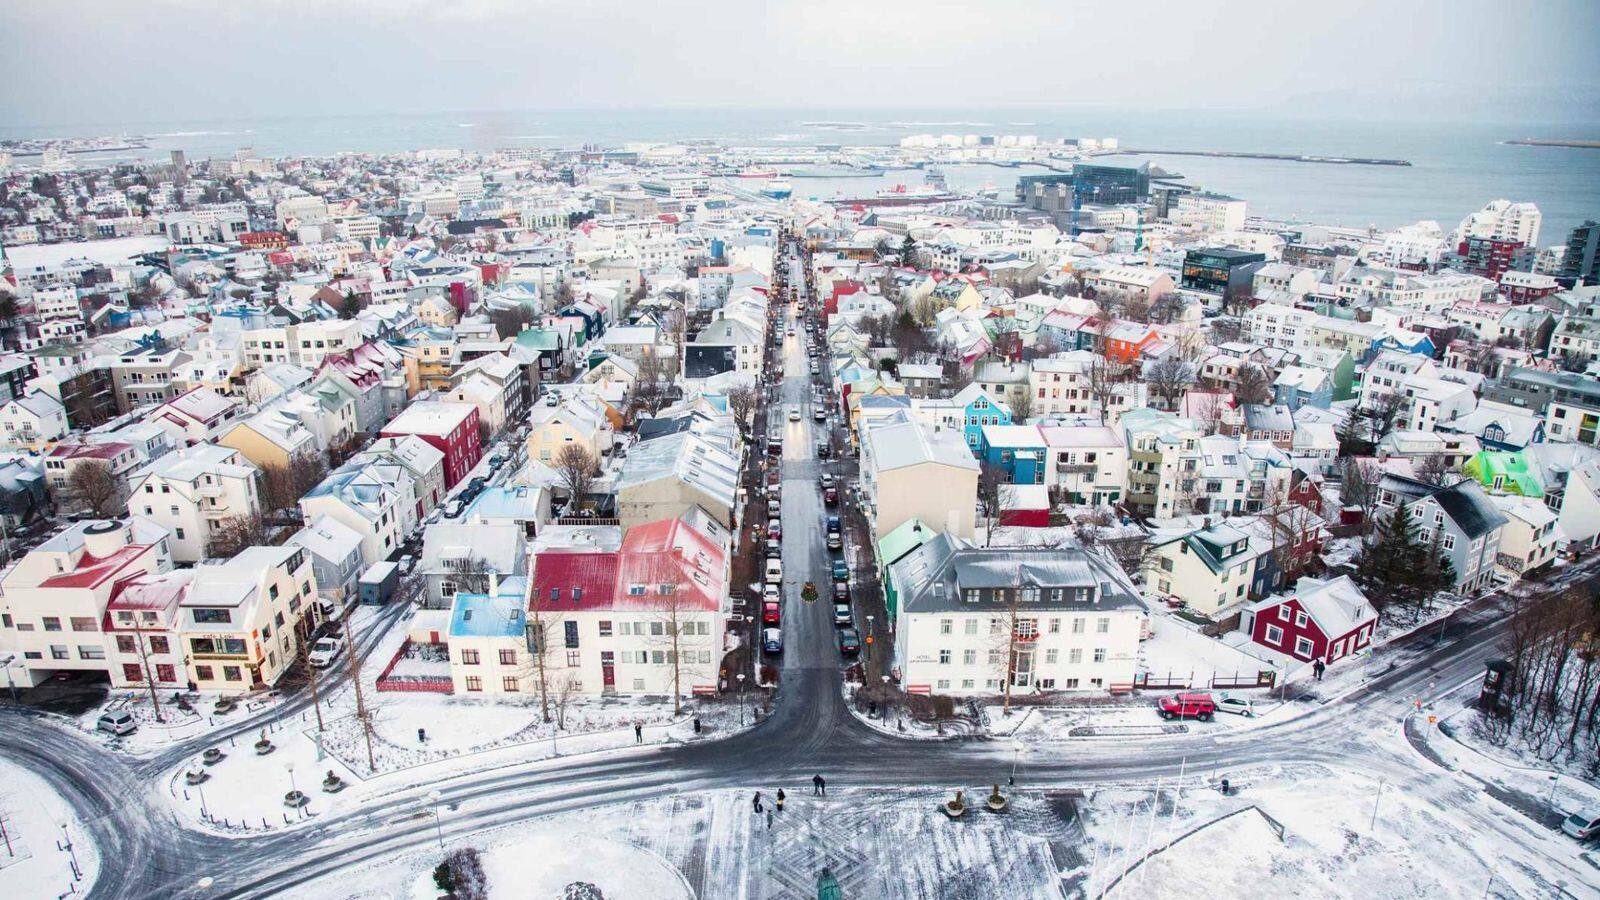 Things to do in Reykjavik, Iceland during winter